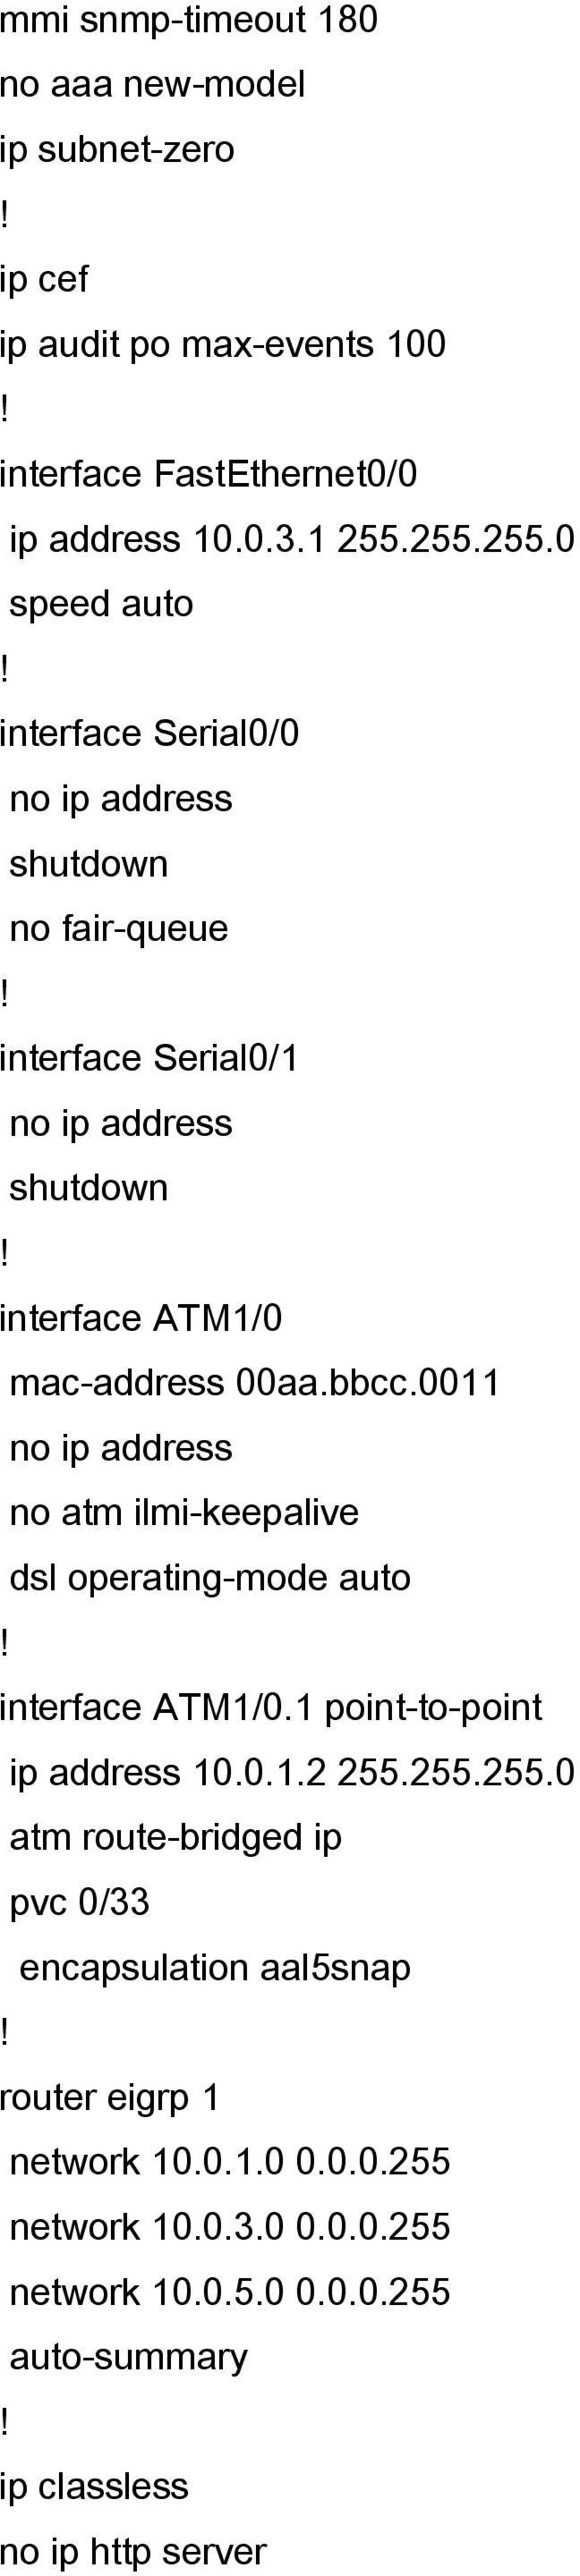 bbcc.0011 no ip address no atm ilmi-keepalive dsl operating-mode auto interface ATM1/0.1 point-to-point ip address 10.0.1.2 255.